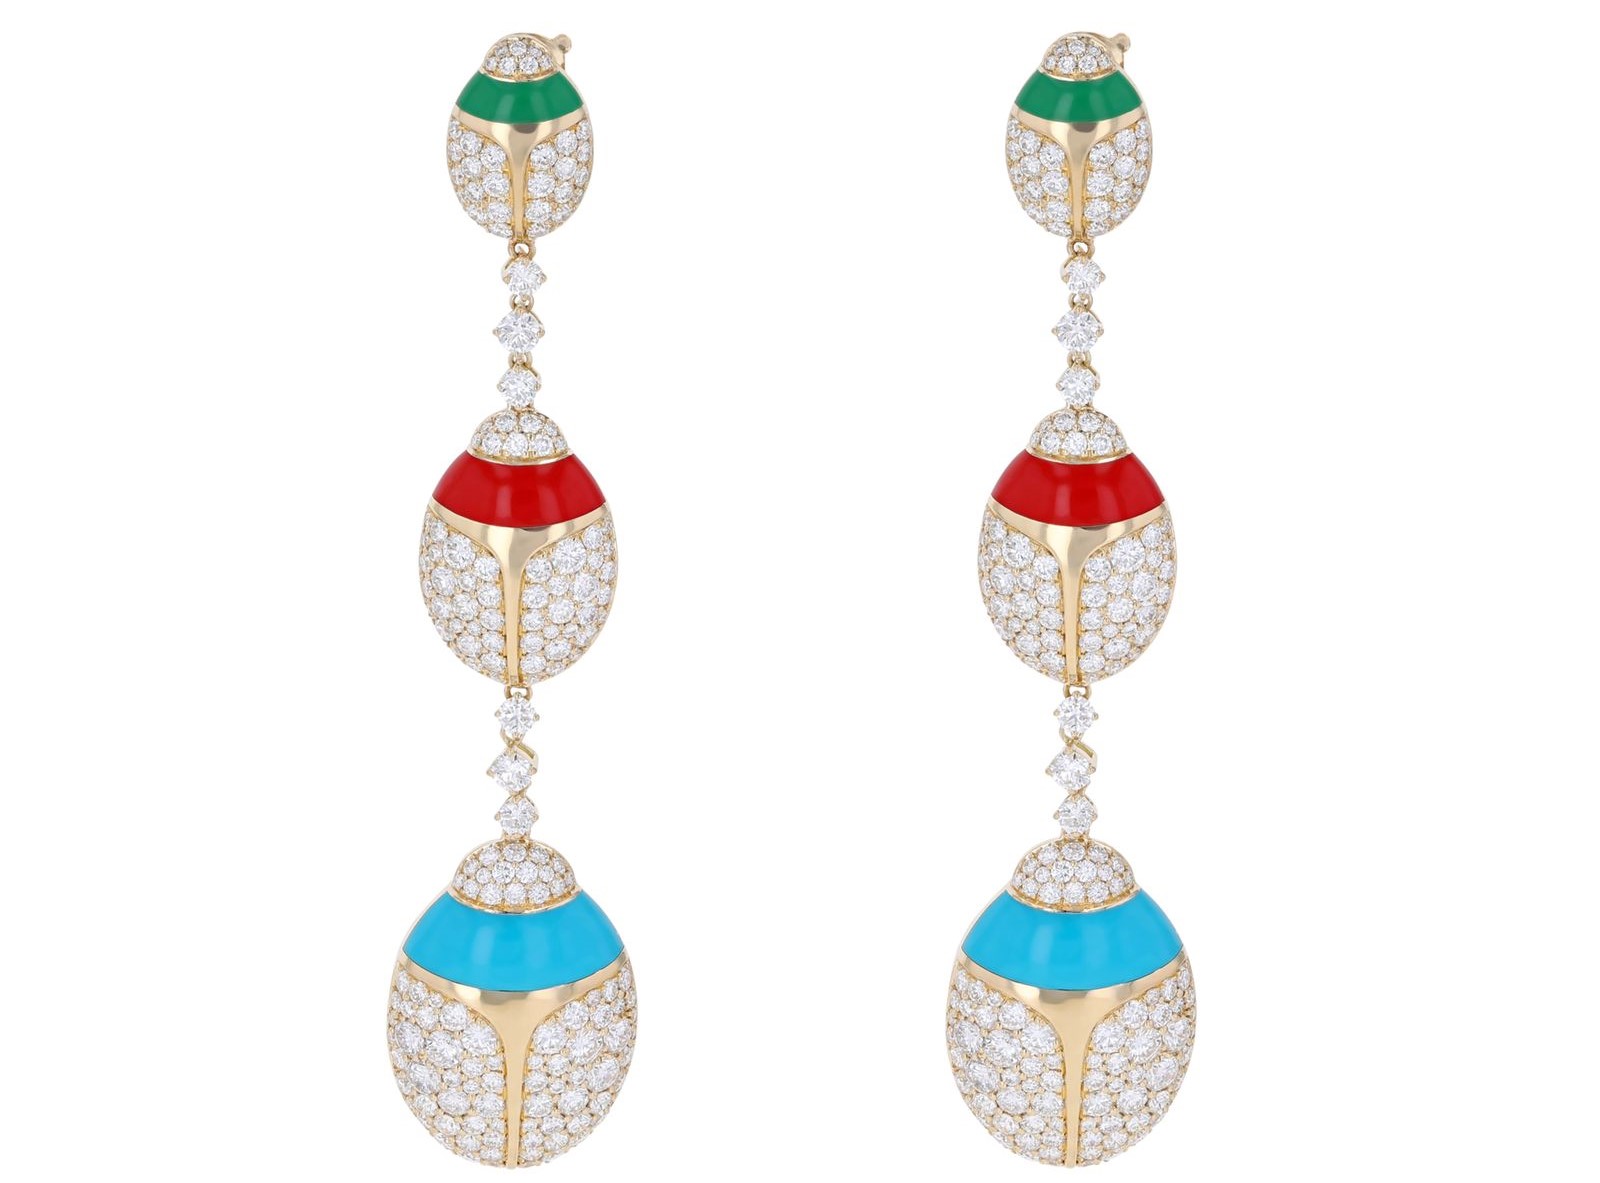 image of a pair of earrings in yellow gold and diamonds